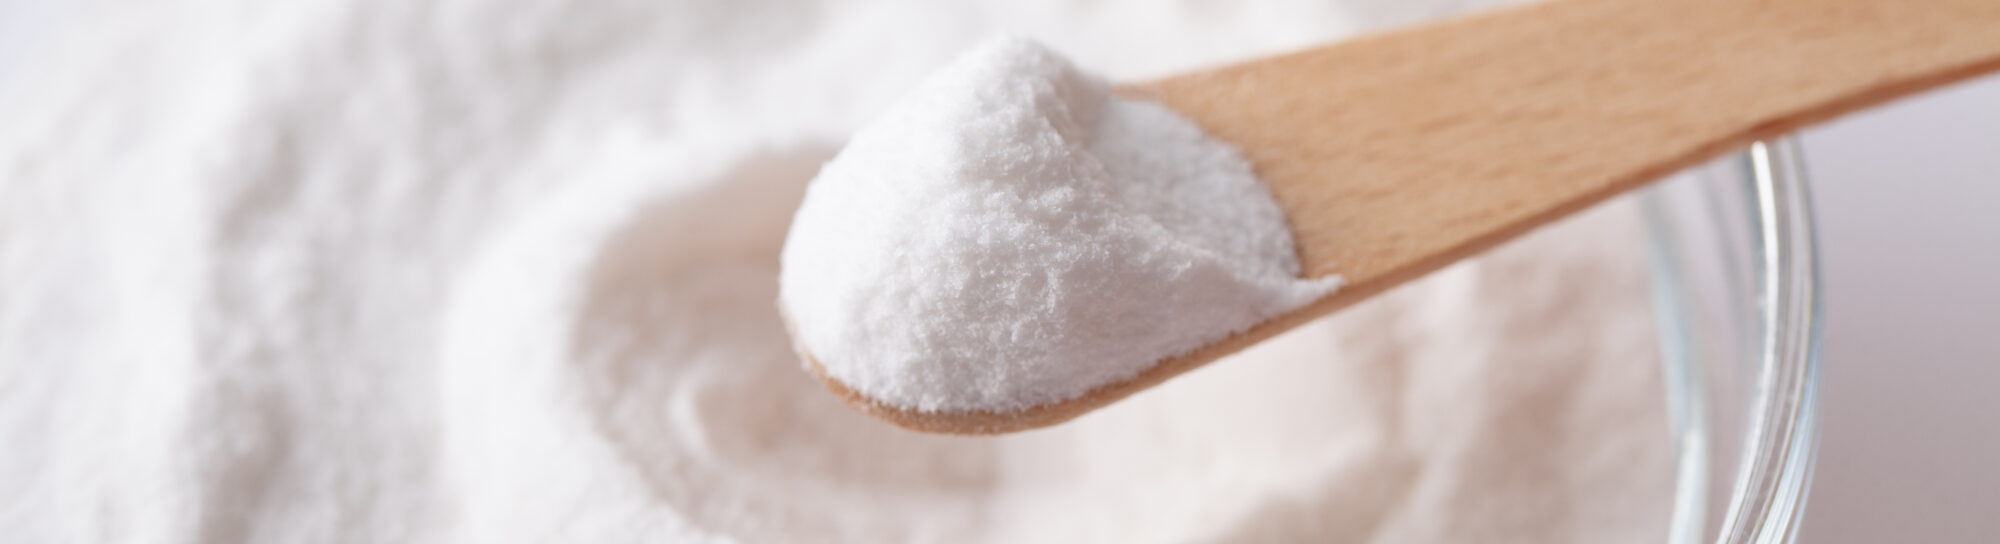 Moderate consumption of aspartame is harmless